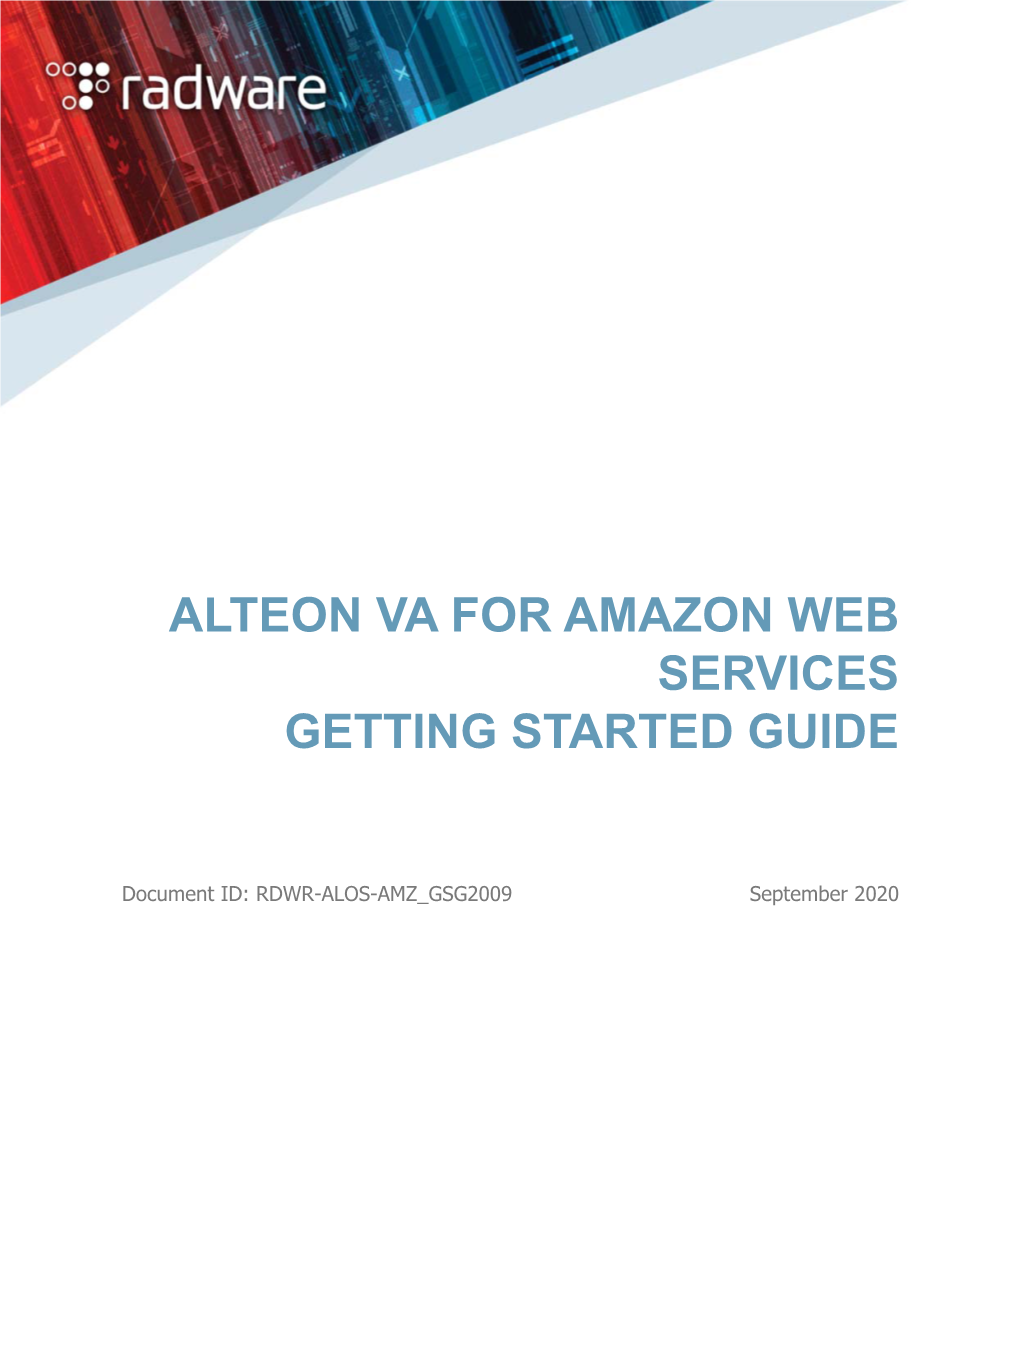 Alteon VA for AWS Getting Started Guide